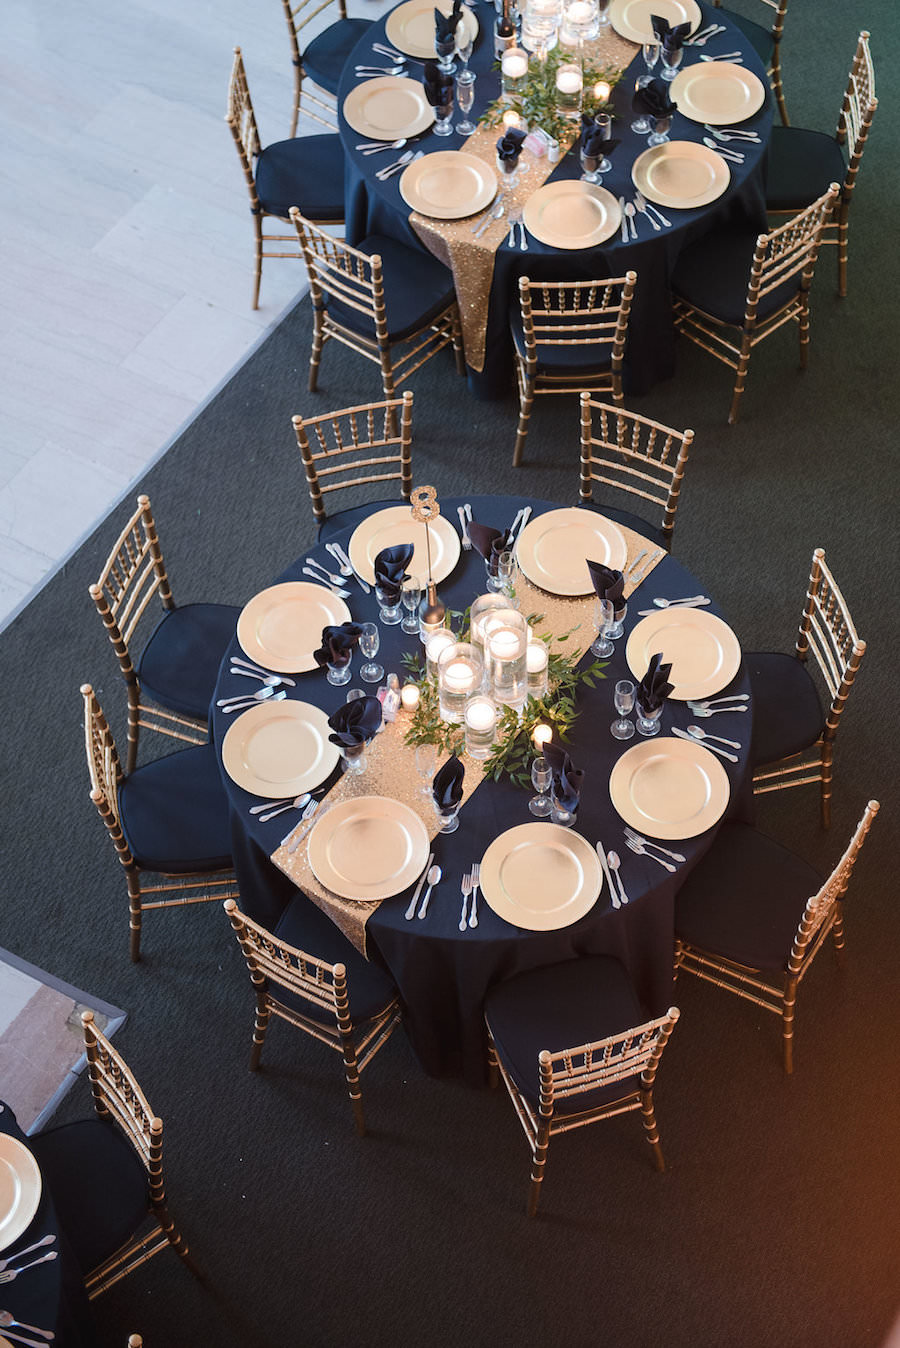 Black and Gold Wedding Reception Ideas and Inspiration with Floating Candle Centerpieces and Gold Chiavari Chairs and Chargers | Downtown Tampa Wedding Venue The Vault | Wedding Photographer Marc Edwards Photographs